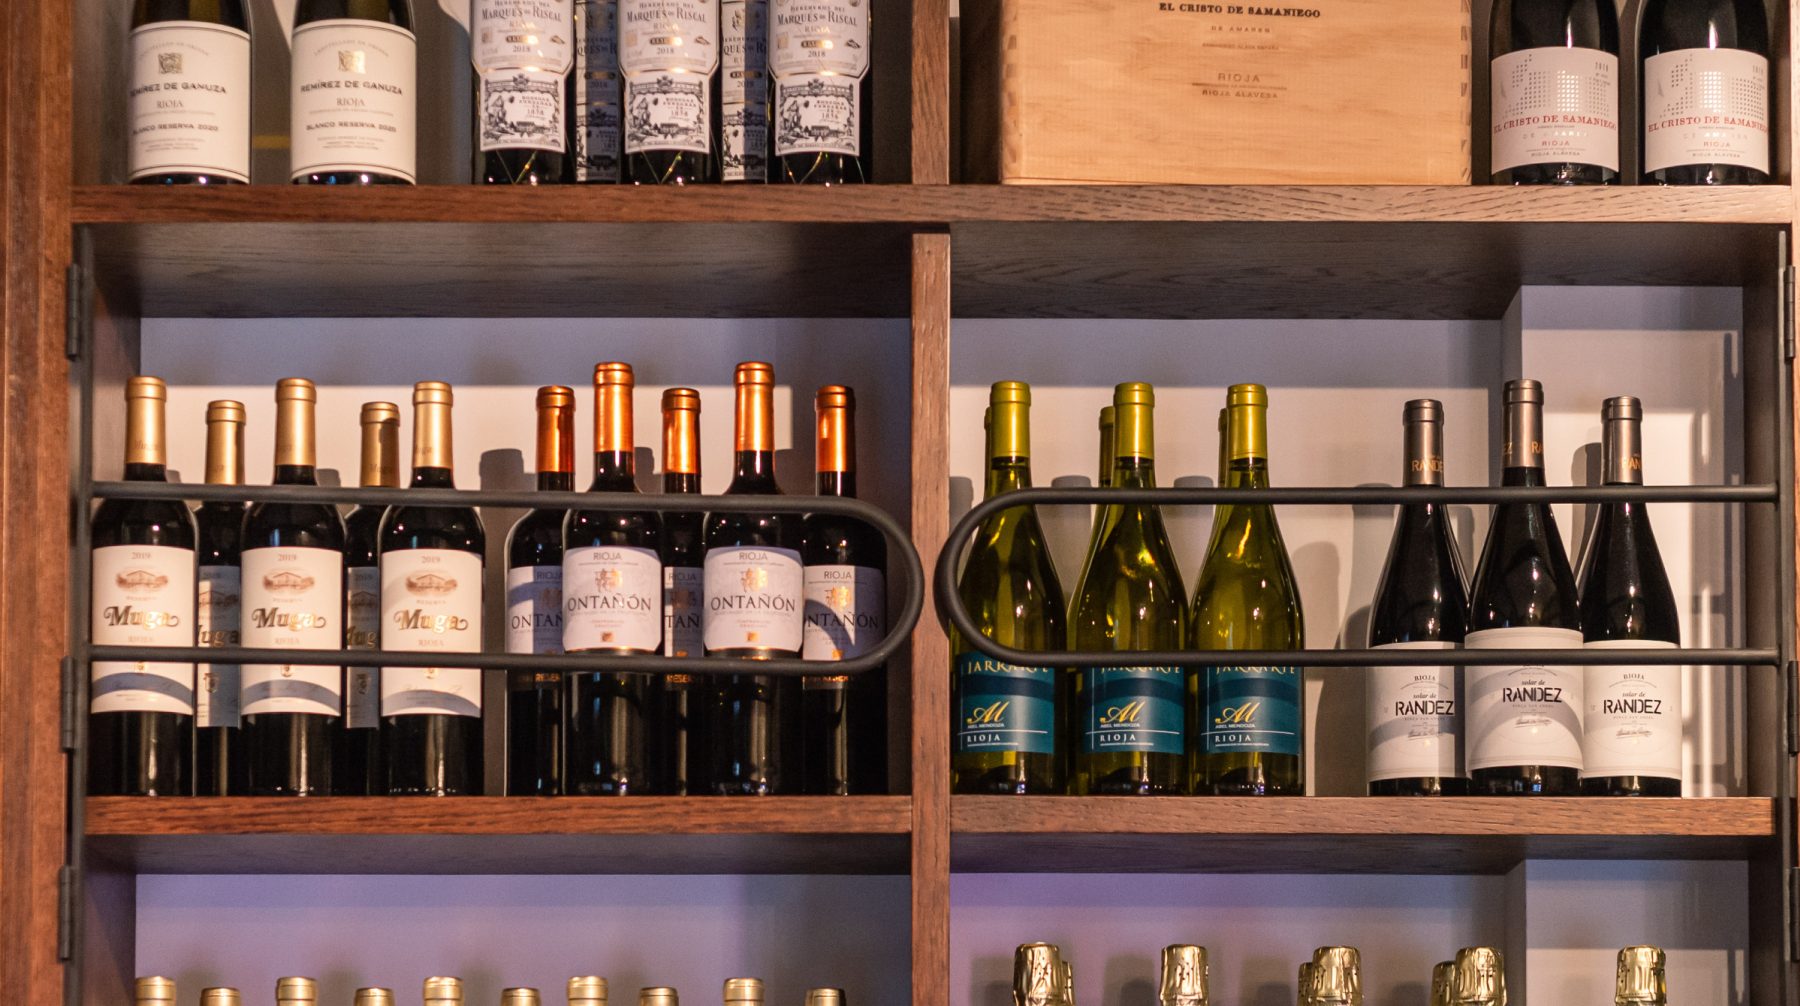 Close up image of wine bottles in a wooden shelving unit.